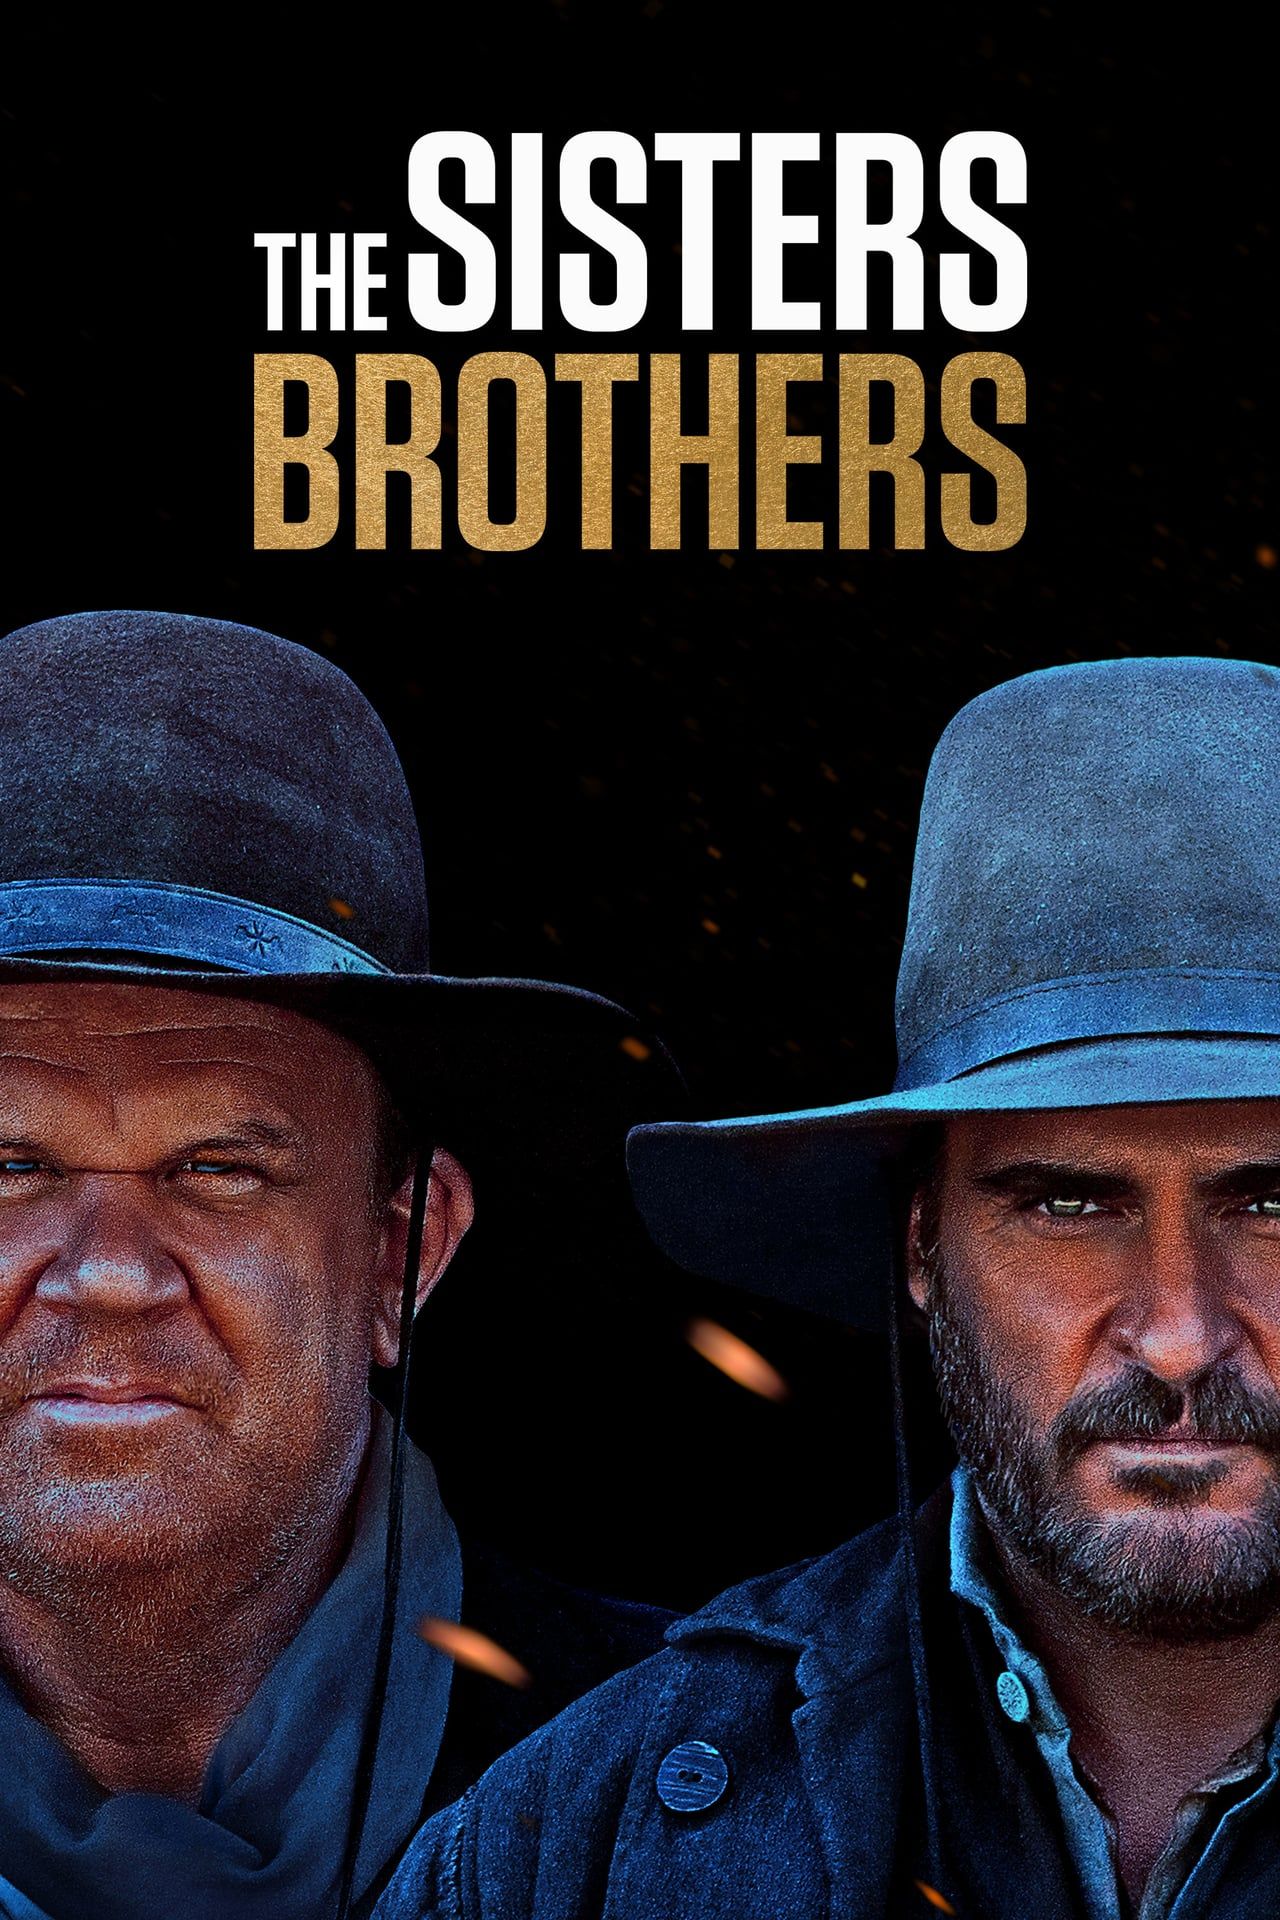 Brothers full movie download